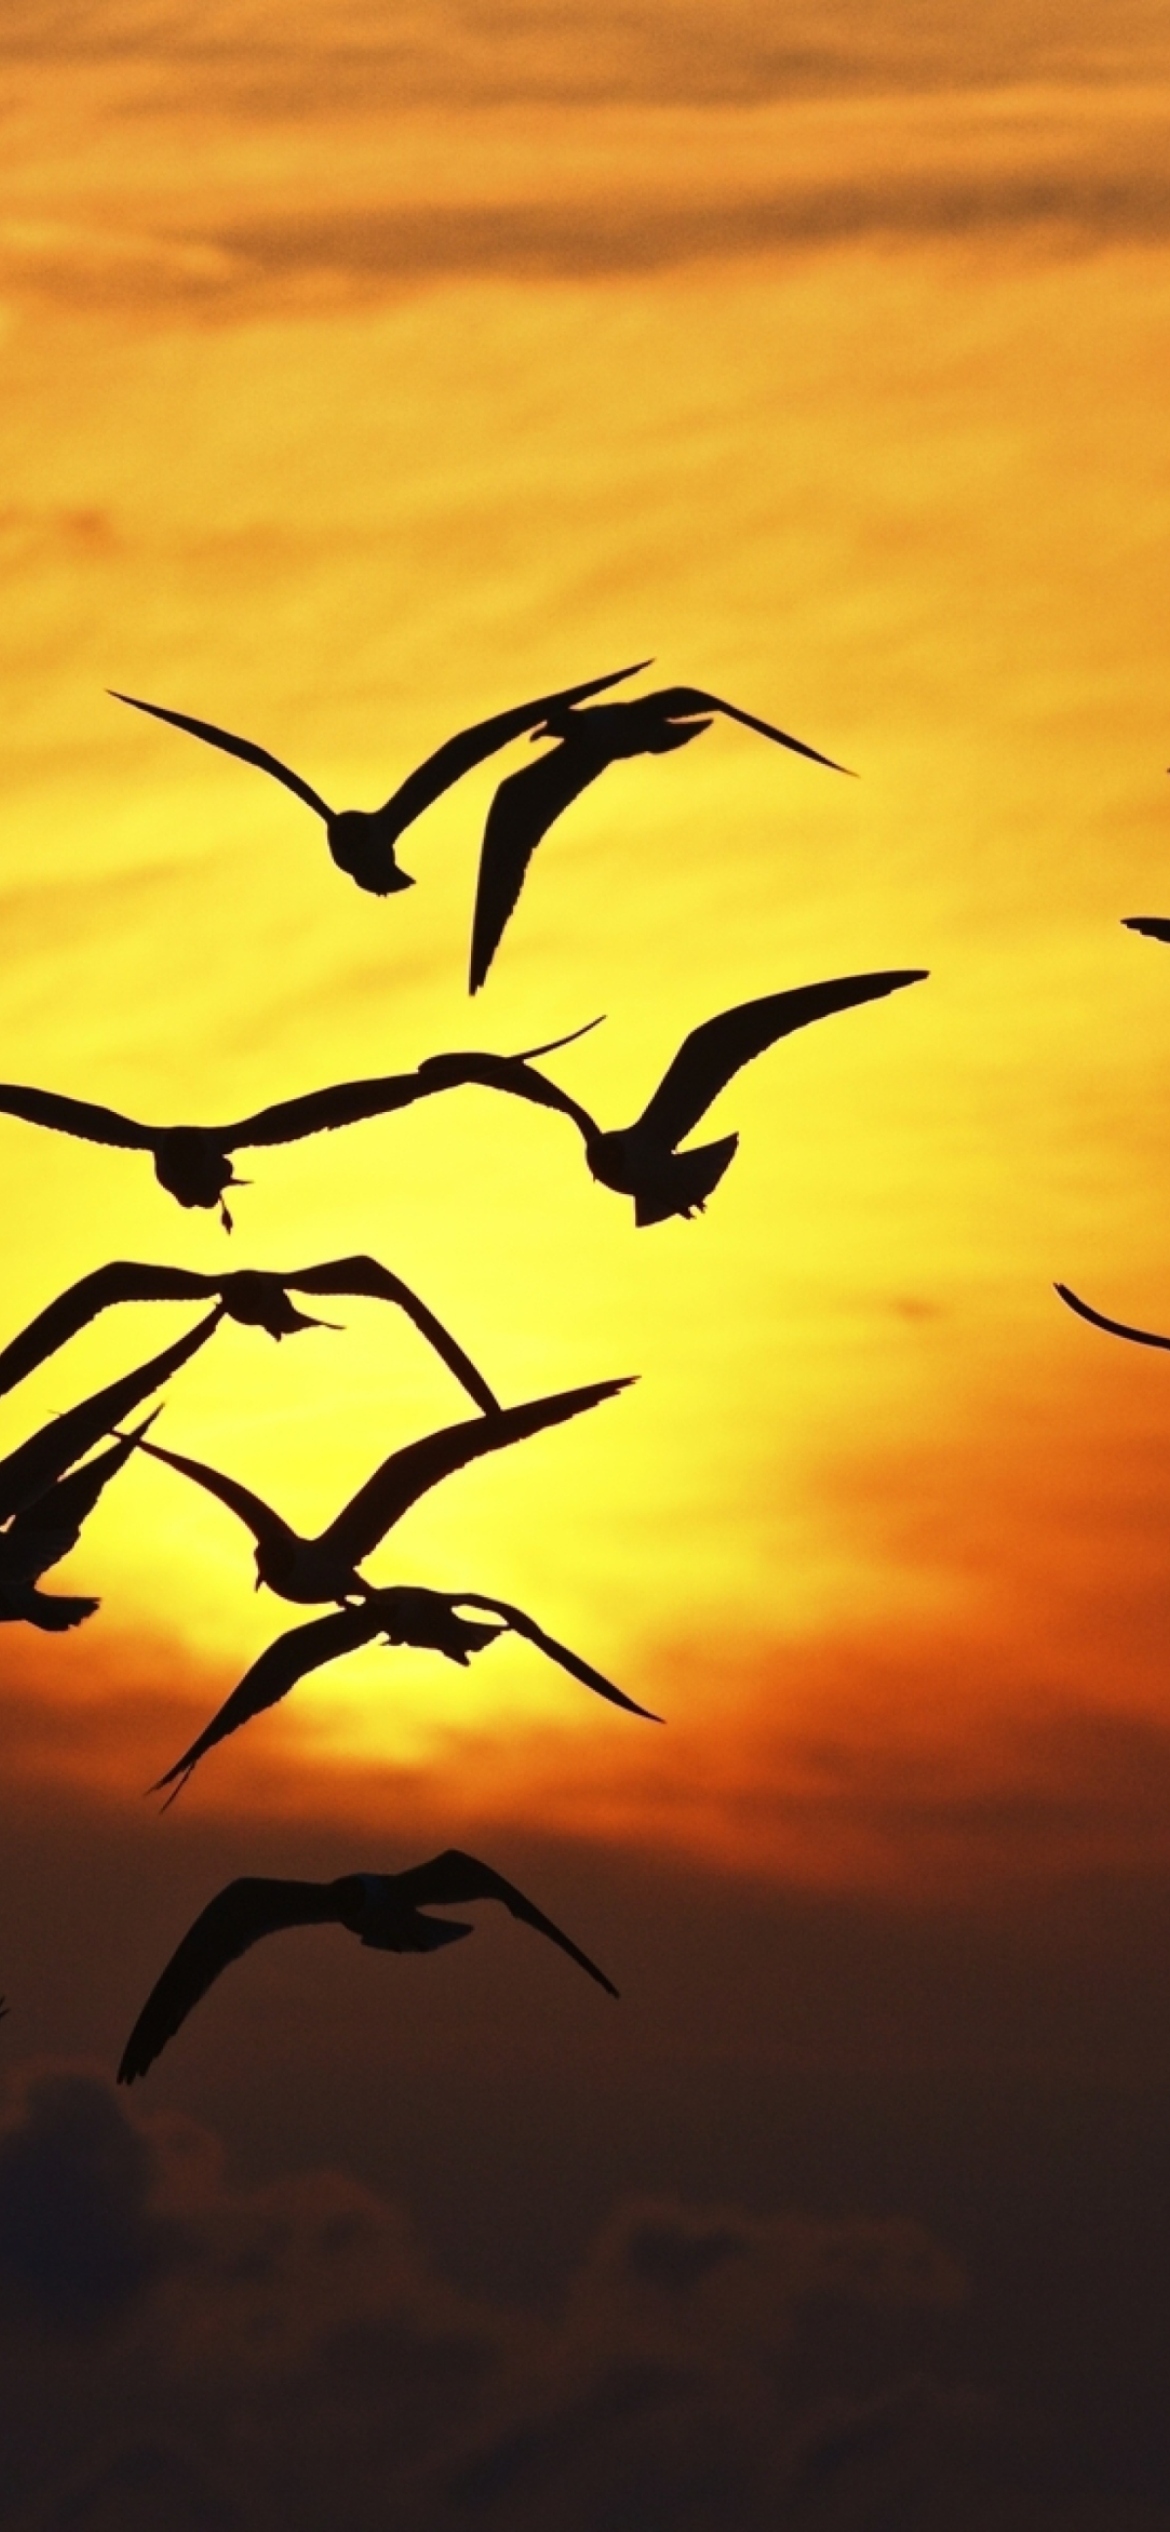 Birds Silhouettes At Sunset wallpaper 1170x2532